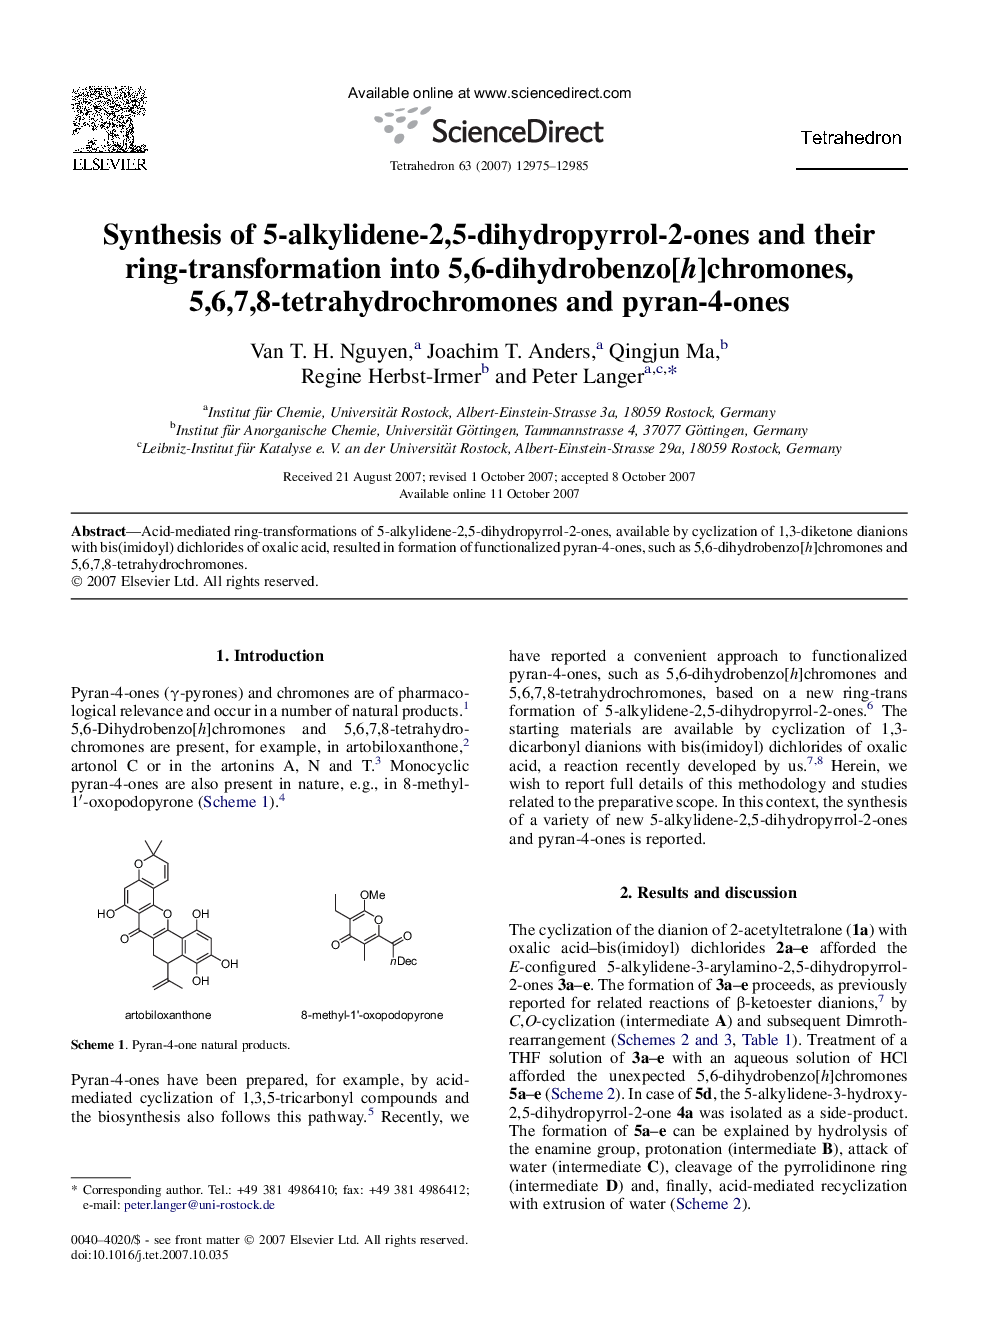 Synthesis of 5-alkylidene-2,5-dihydropyrrol-2-ones and their ring-transformation into 5,6-dihydrobenzo[h]chromones, 5,6,7,8-tetrahydrochromones and pyran-4-ones